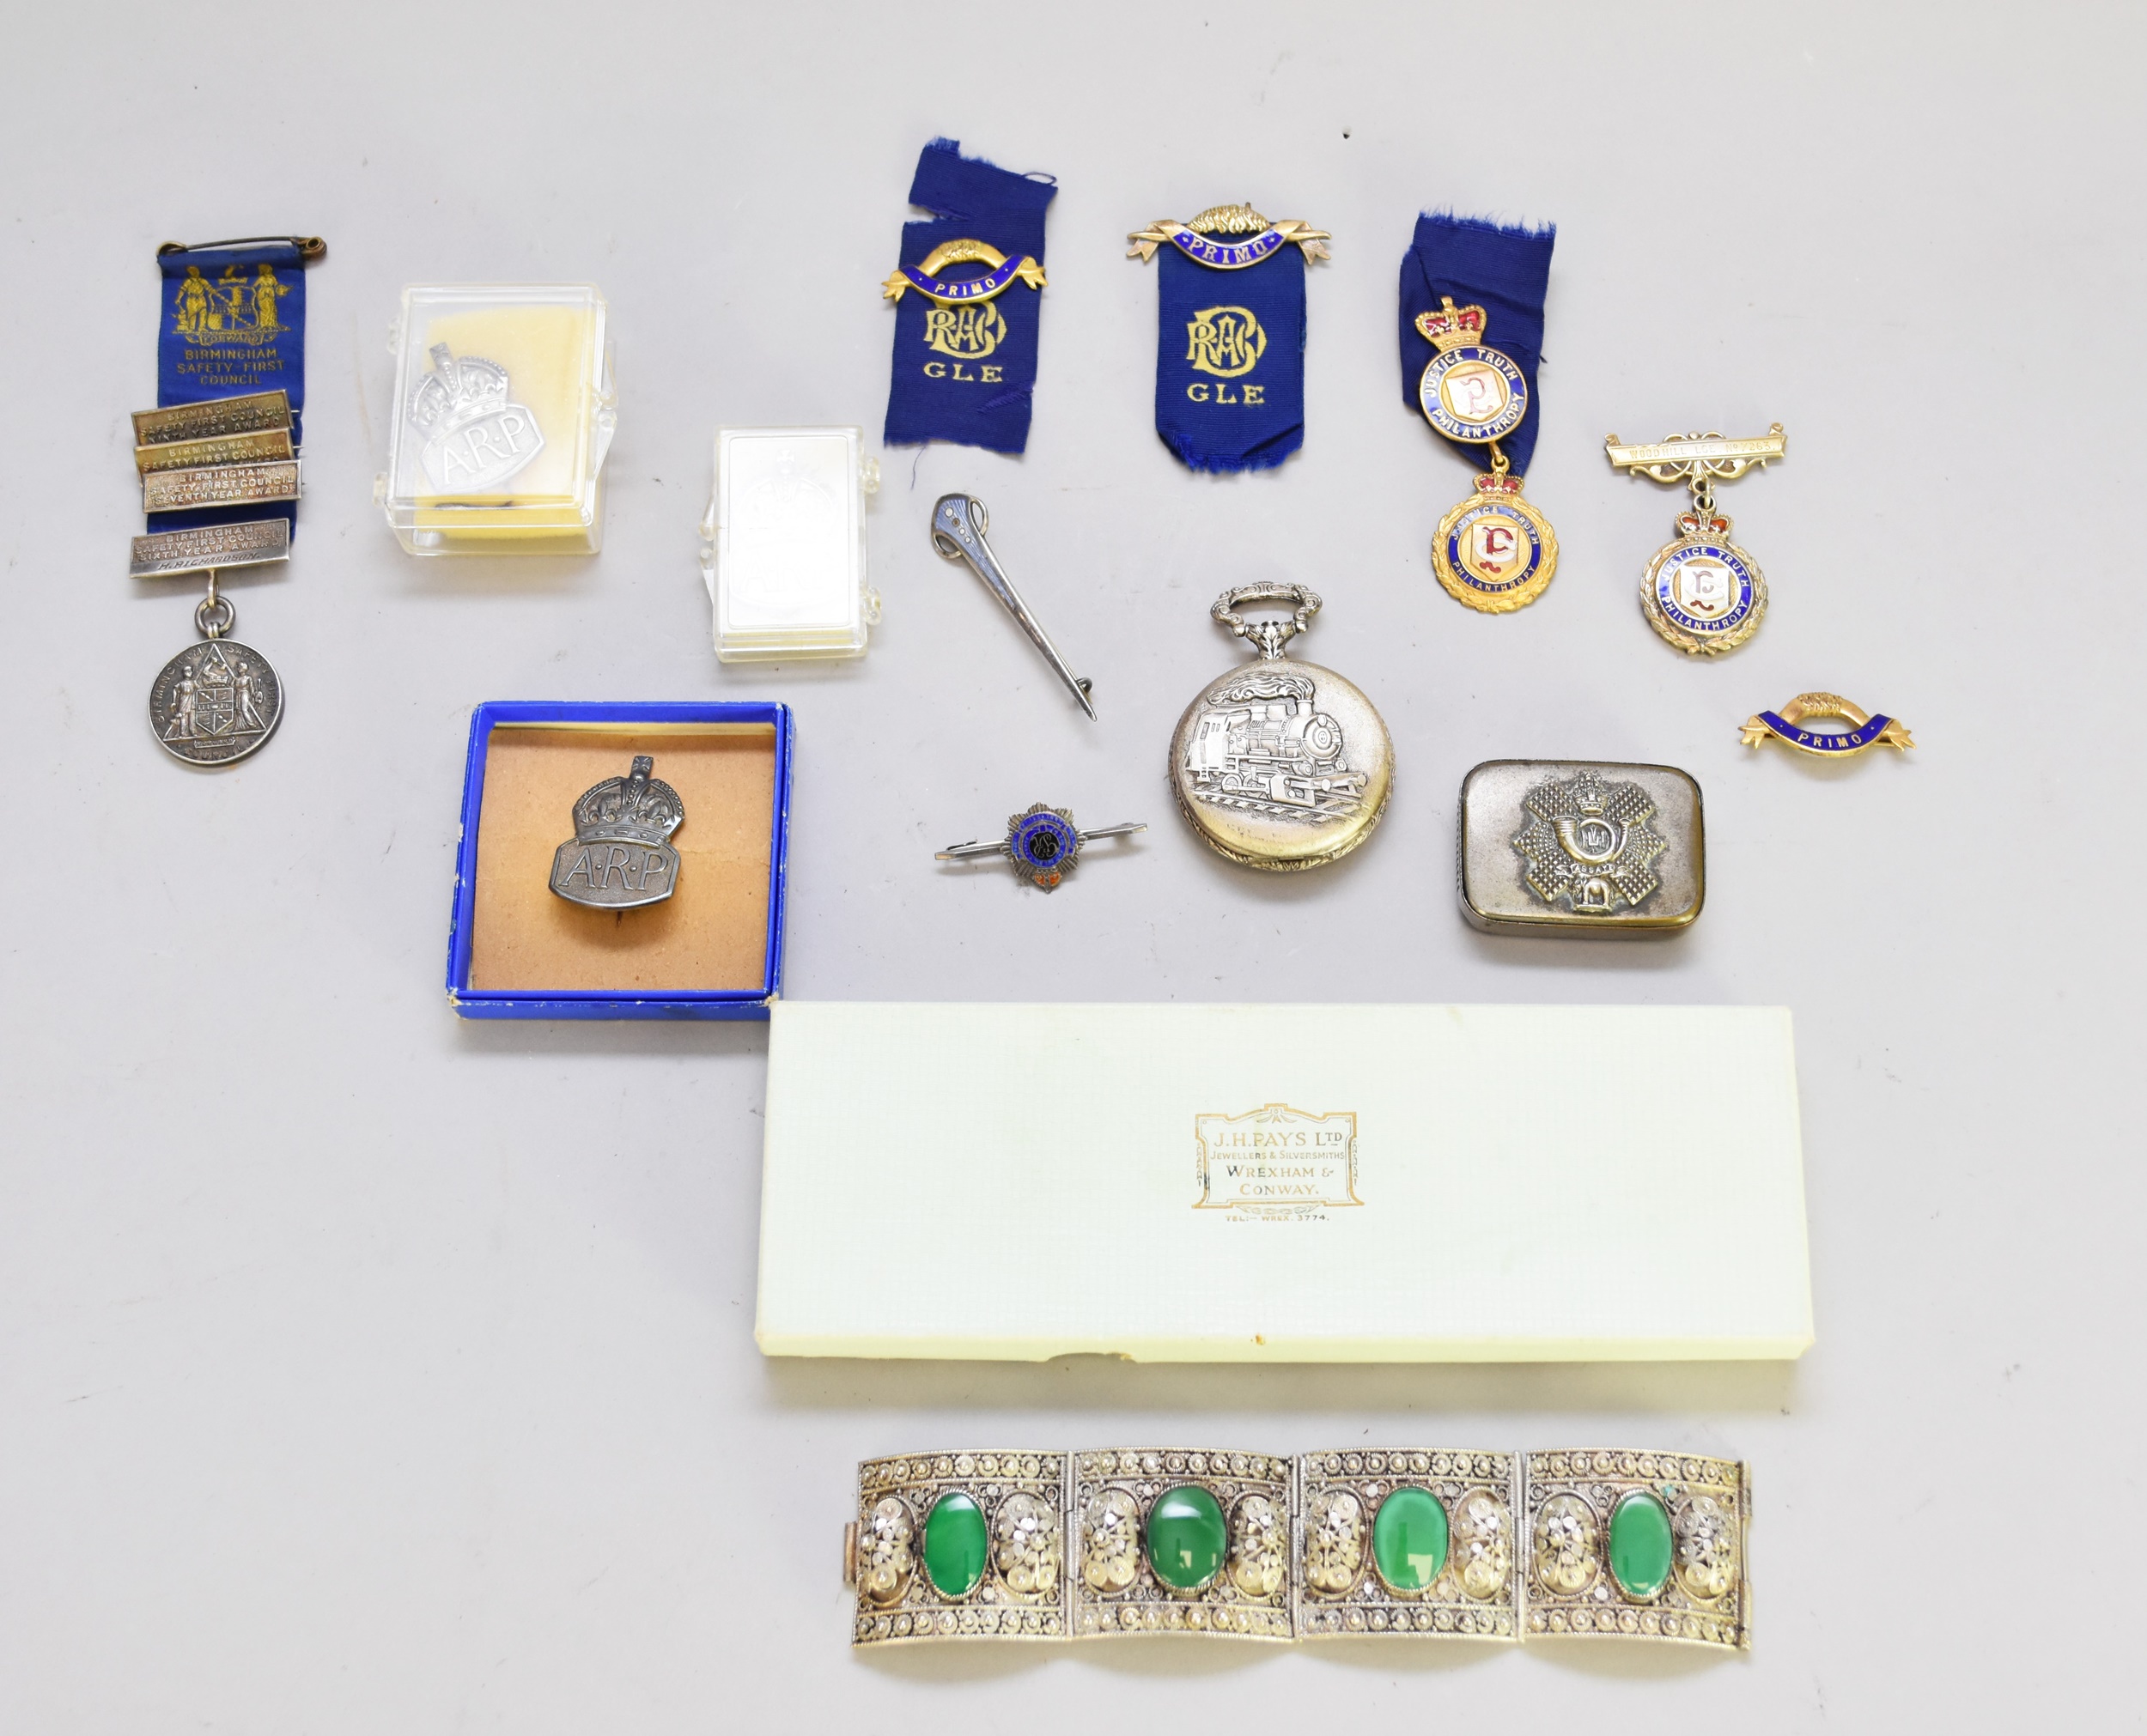 A small collection of costume jewellery and medals